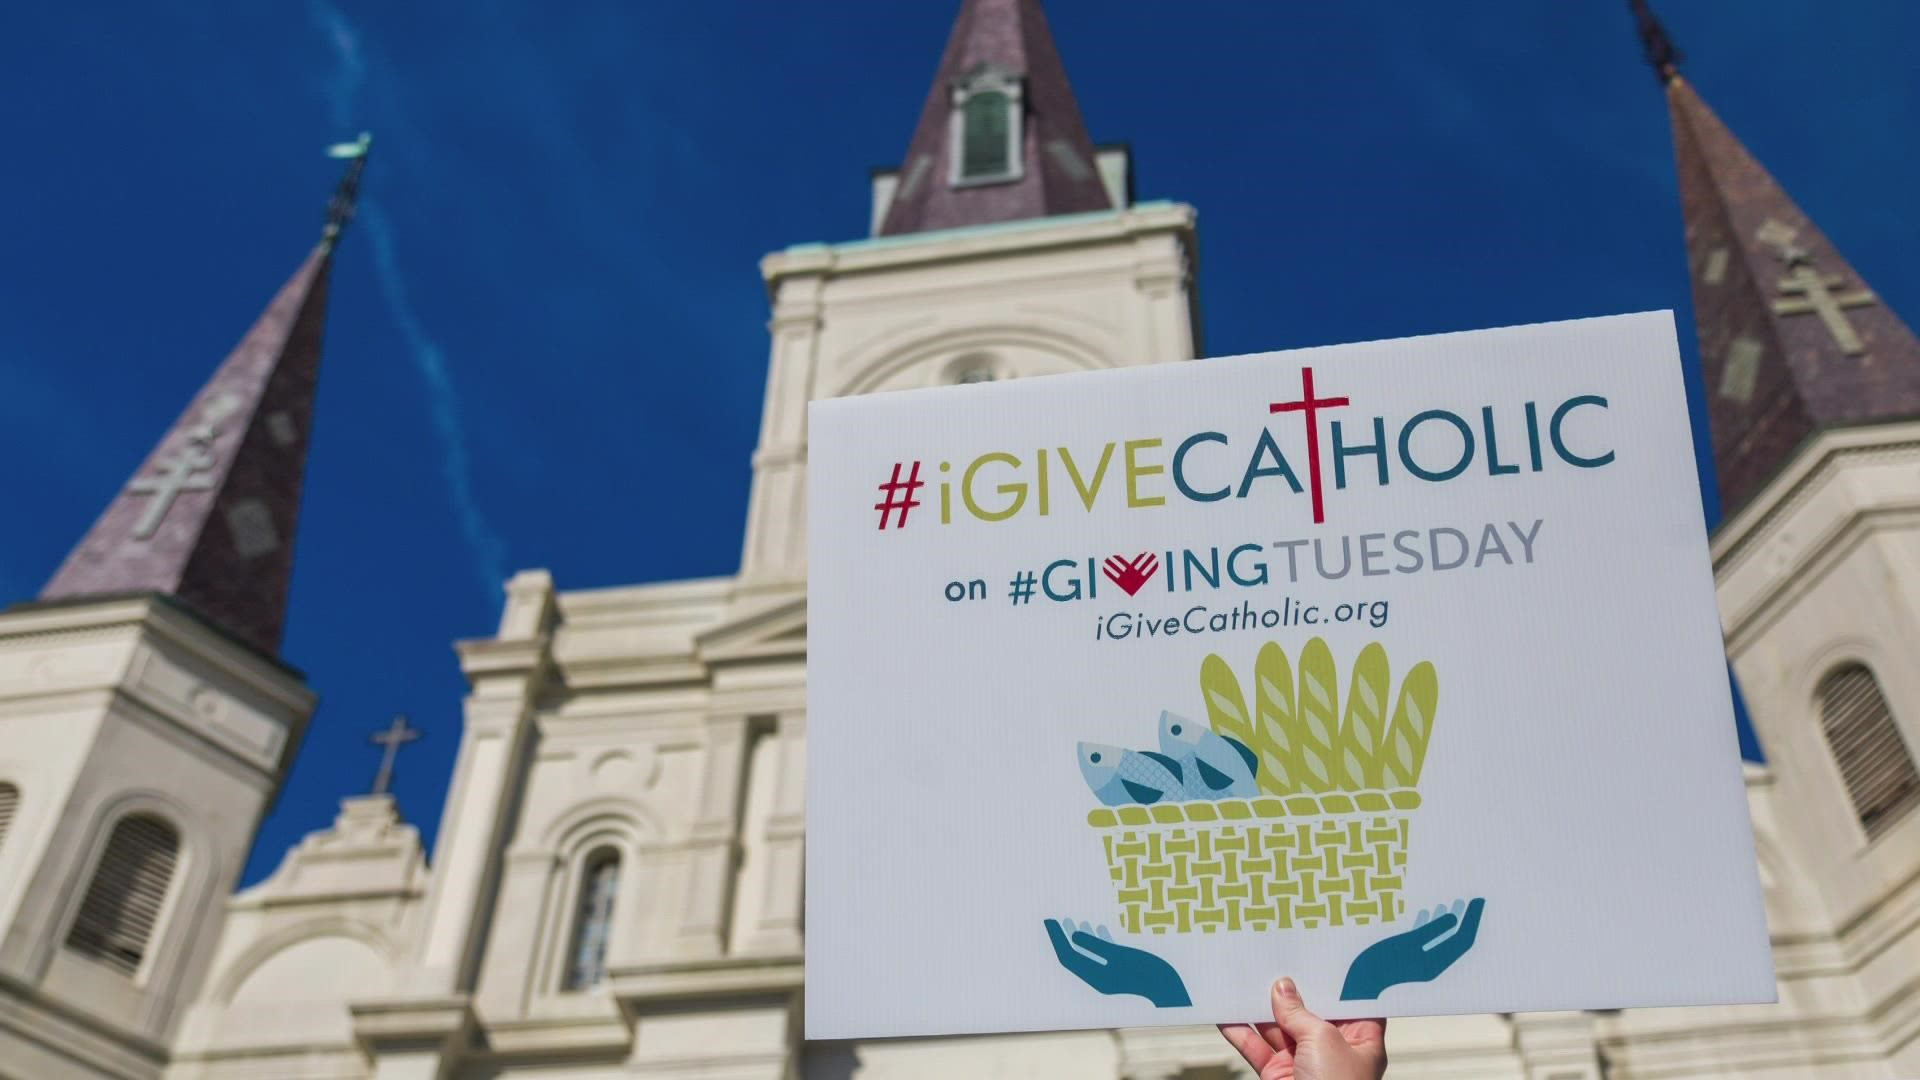 Giving Tuesday is the Tuesday after Thanksgiving, Nov. 30, a global generosity movement.